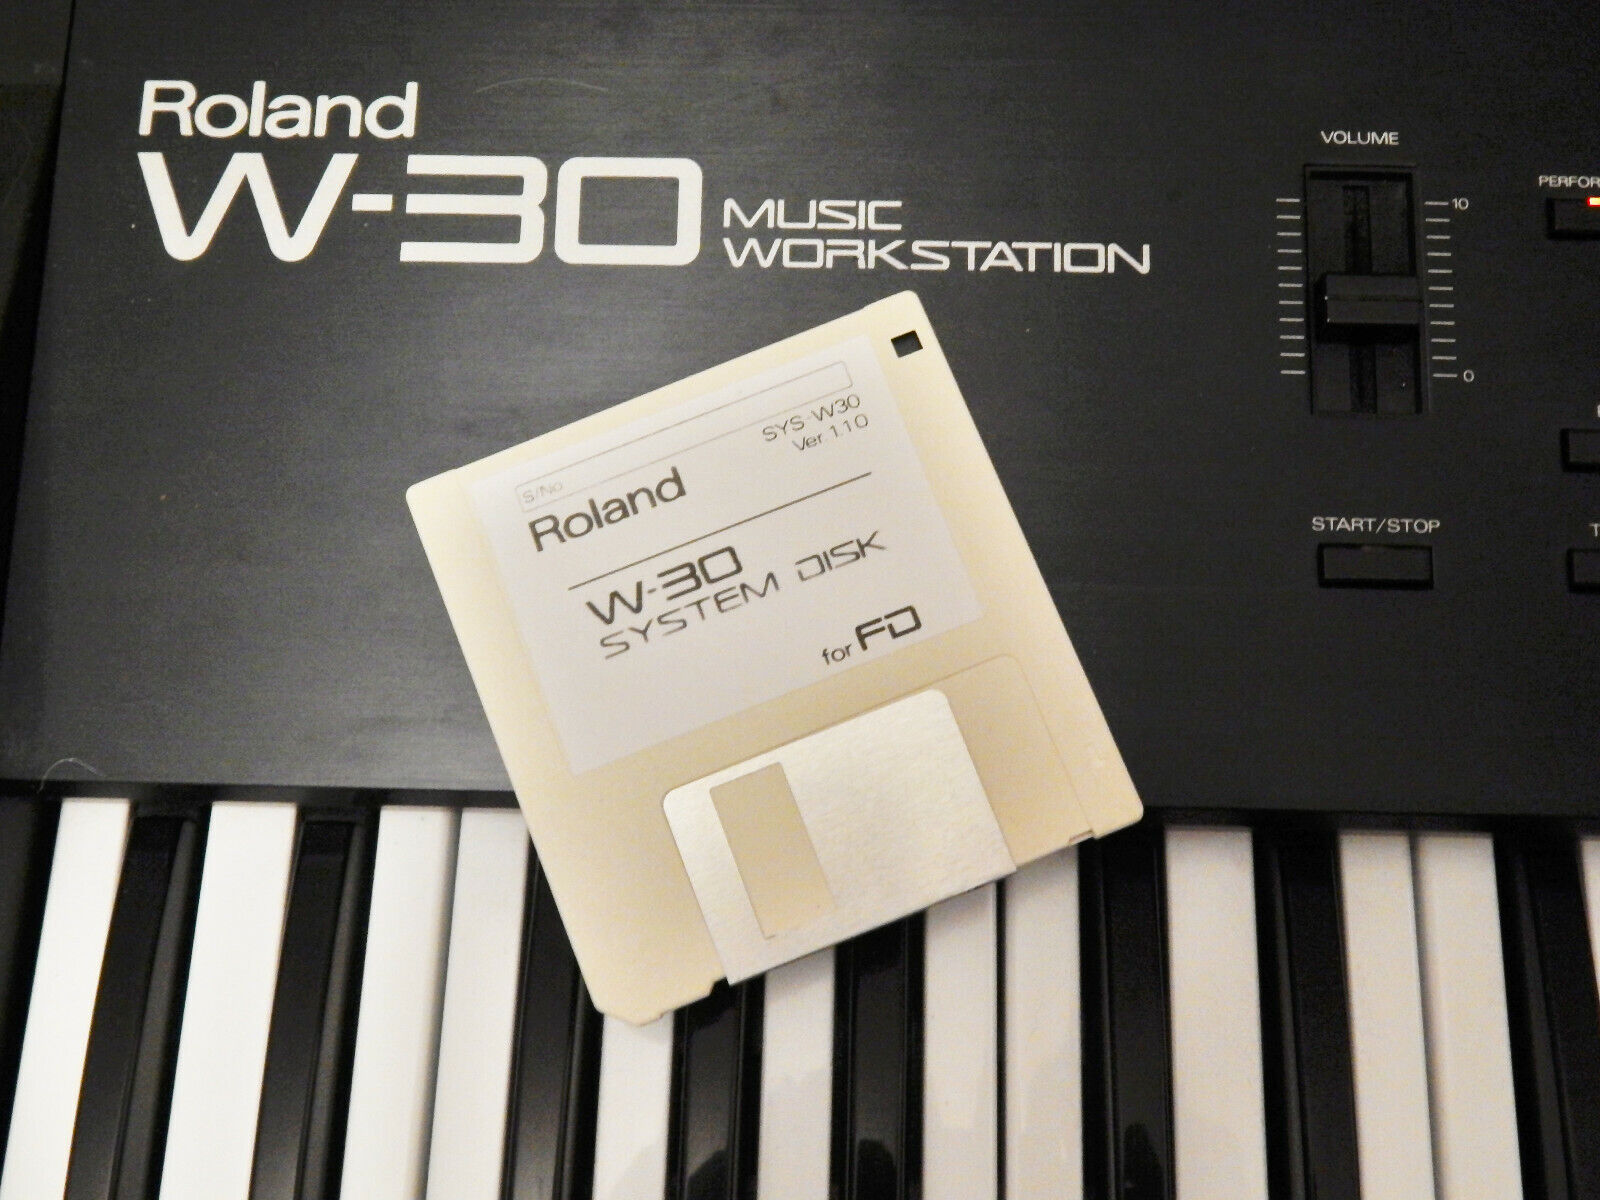 Roland w30 os disk version 1.10 for FD 